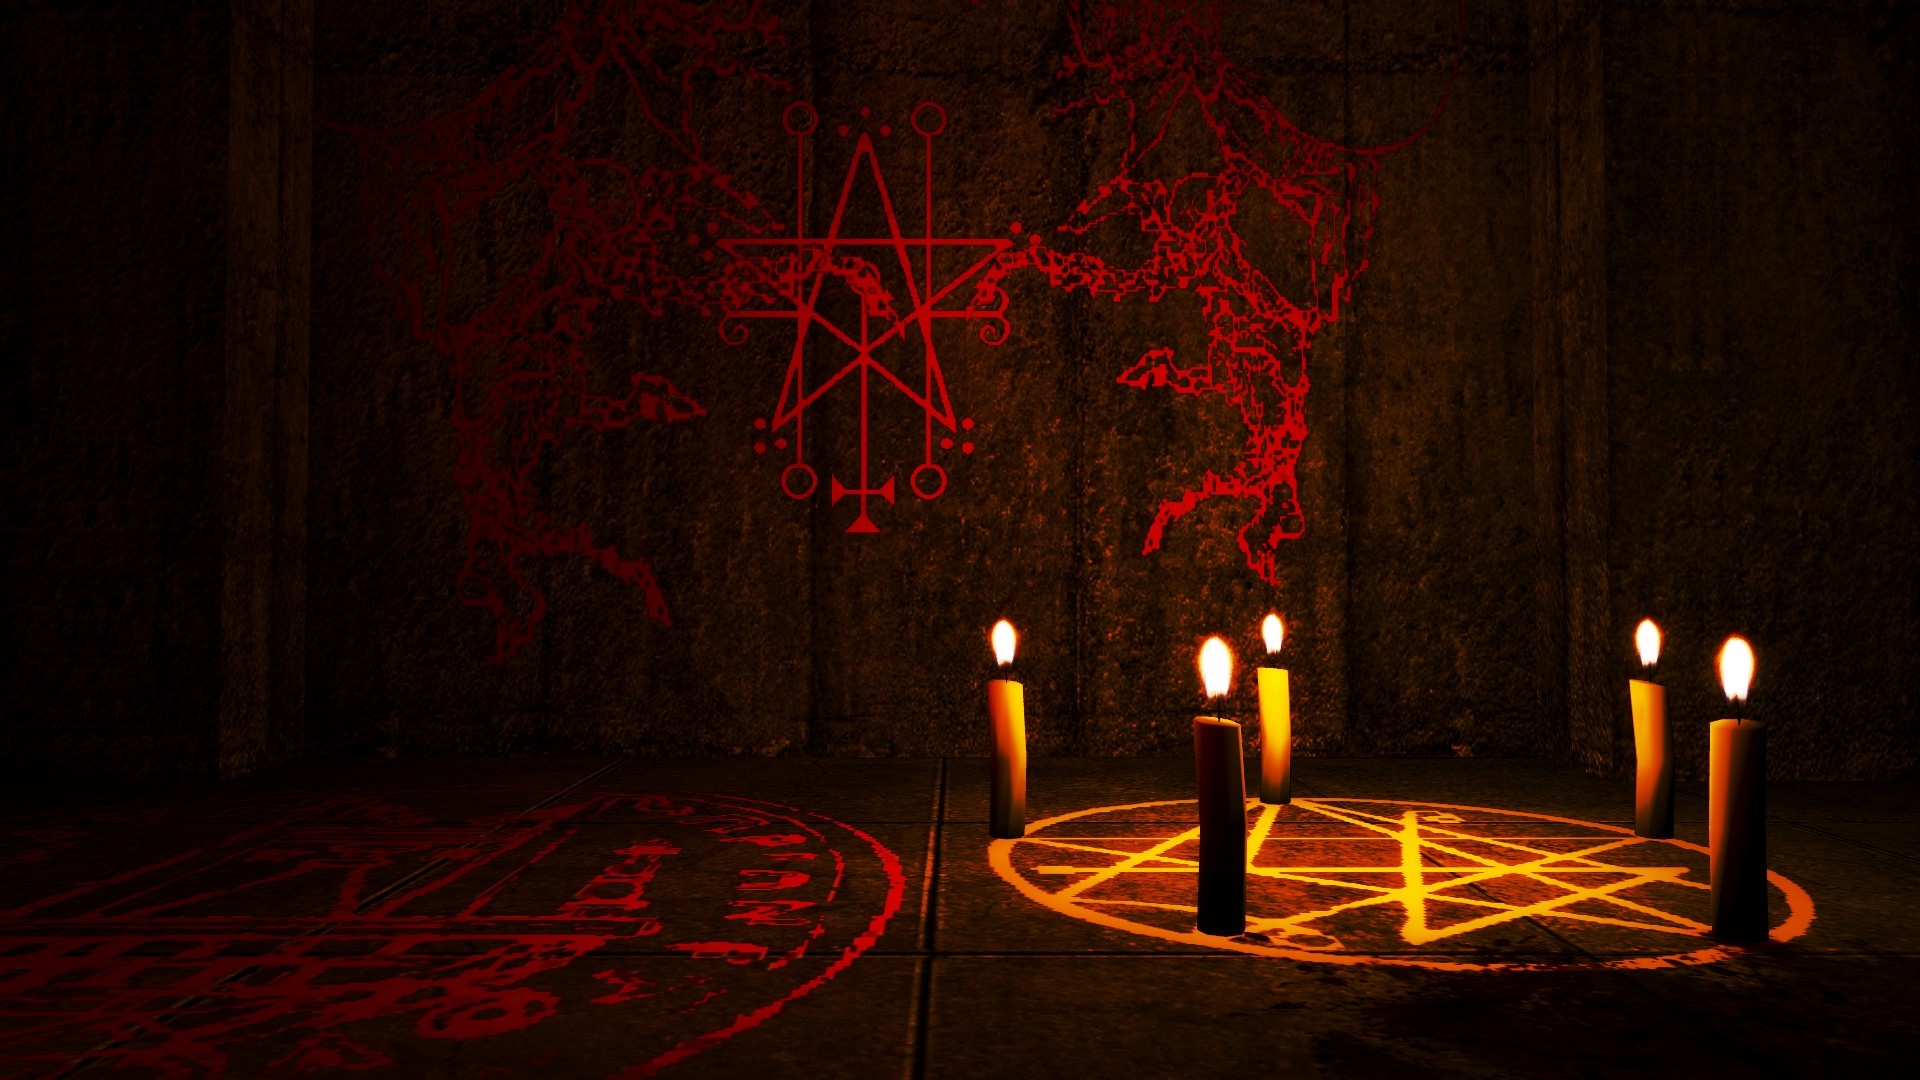 Cult Of Cthulhu Occult Windows Wallpaper Windows8 For